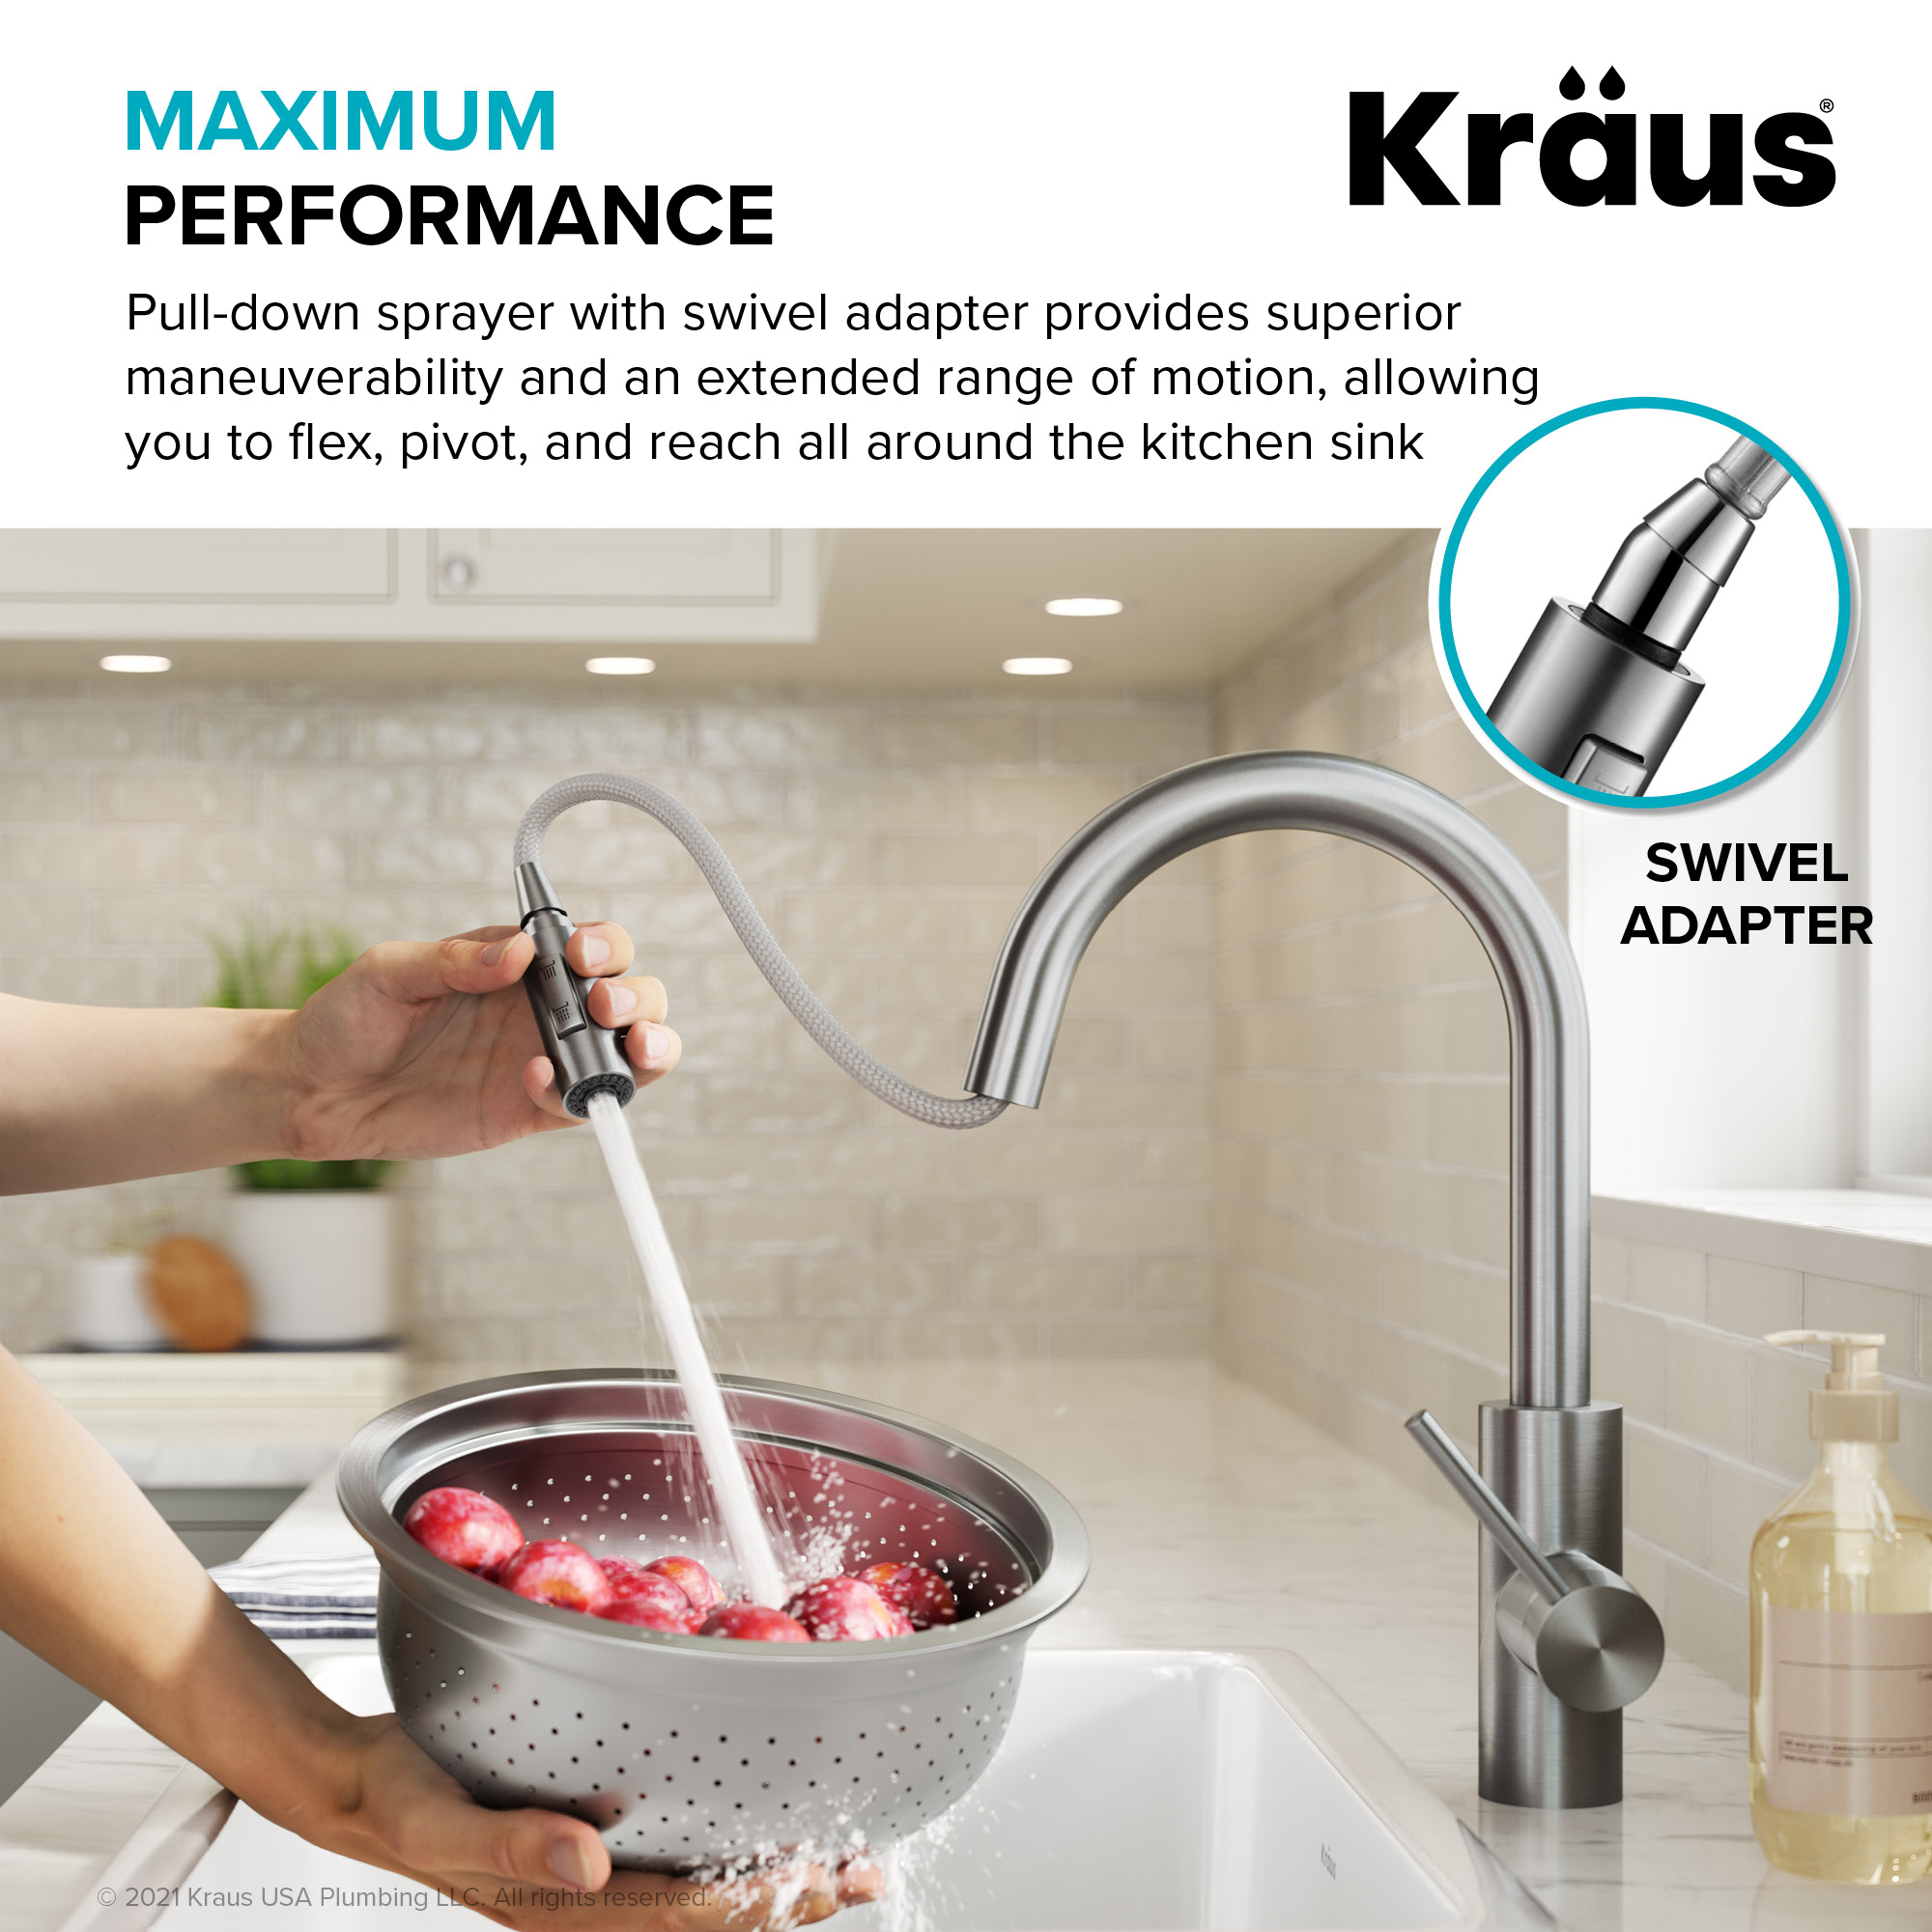 Kraus Oletto Spot Free Stainless Steel Single Handle Pull-down